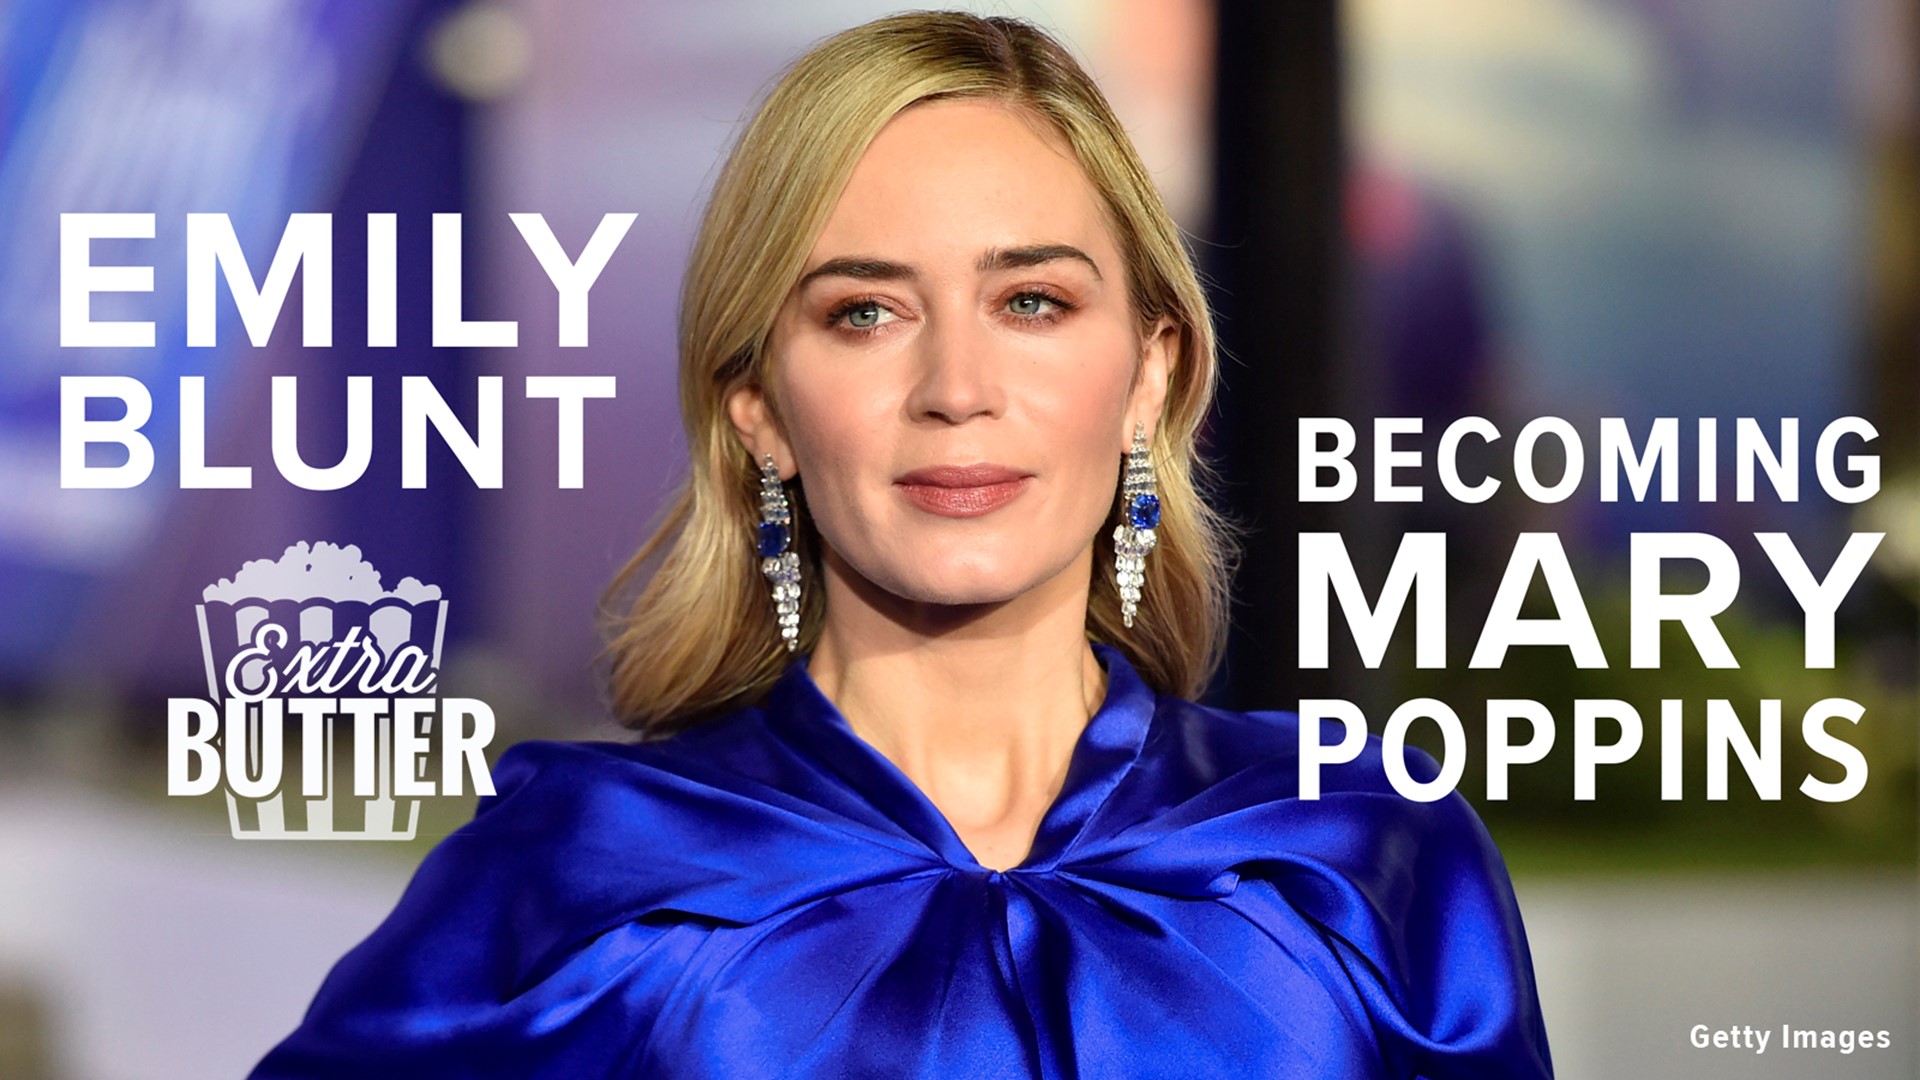 Emily Blunt talks about the nerves she had while playing Mary Poppins in the new movie, "Mary Poppins Returns." Emily also tells Mark S. Allen about the crazy year which started with "A Quiet Place," and working with Lin Manuel Miranda.


Watch Extra Butter every Friday morning at 9:30 a.m. on ABC10. 
Like Extra Butter on Facebook: www.facebook.com/ExtraButterTV/

Interview provided by Walt Disney Studios Motion Pictures